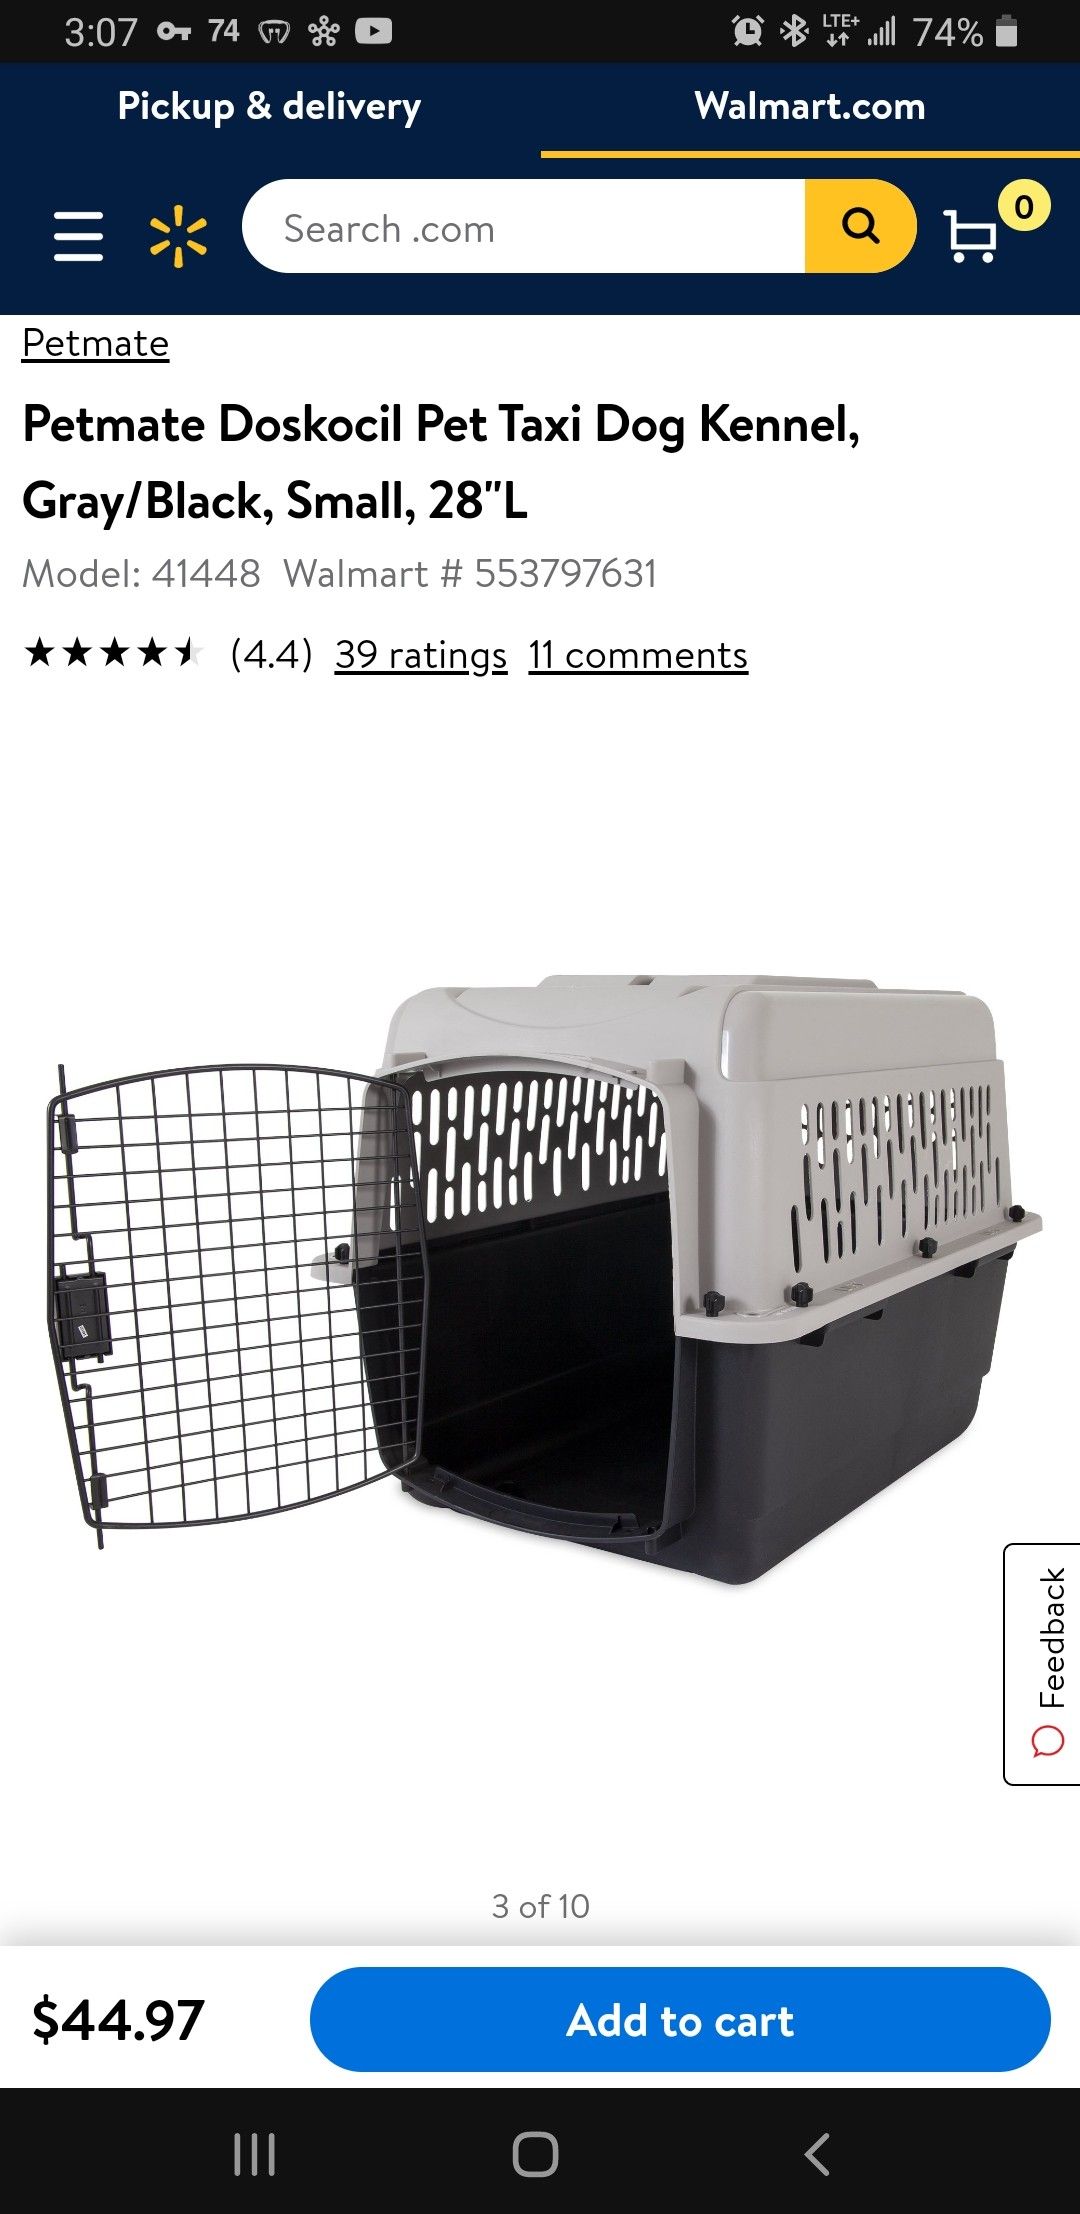 Pet Taxi Dog Kennel